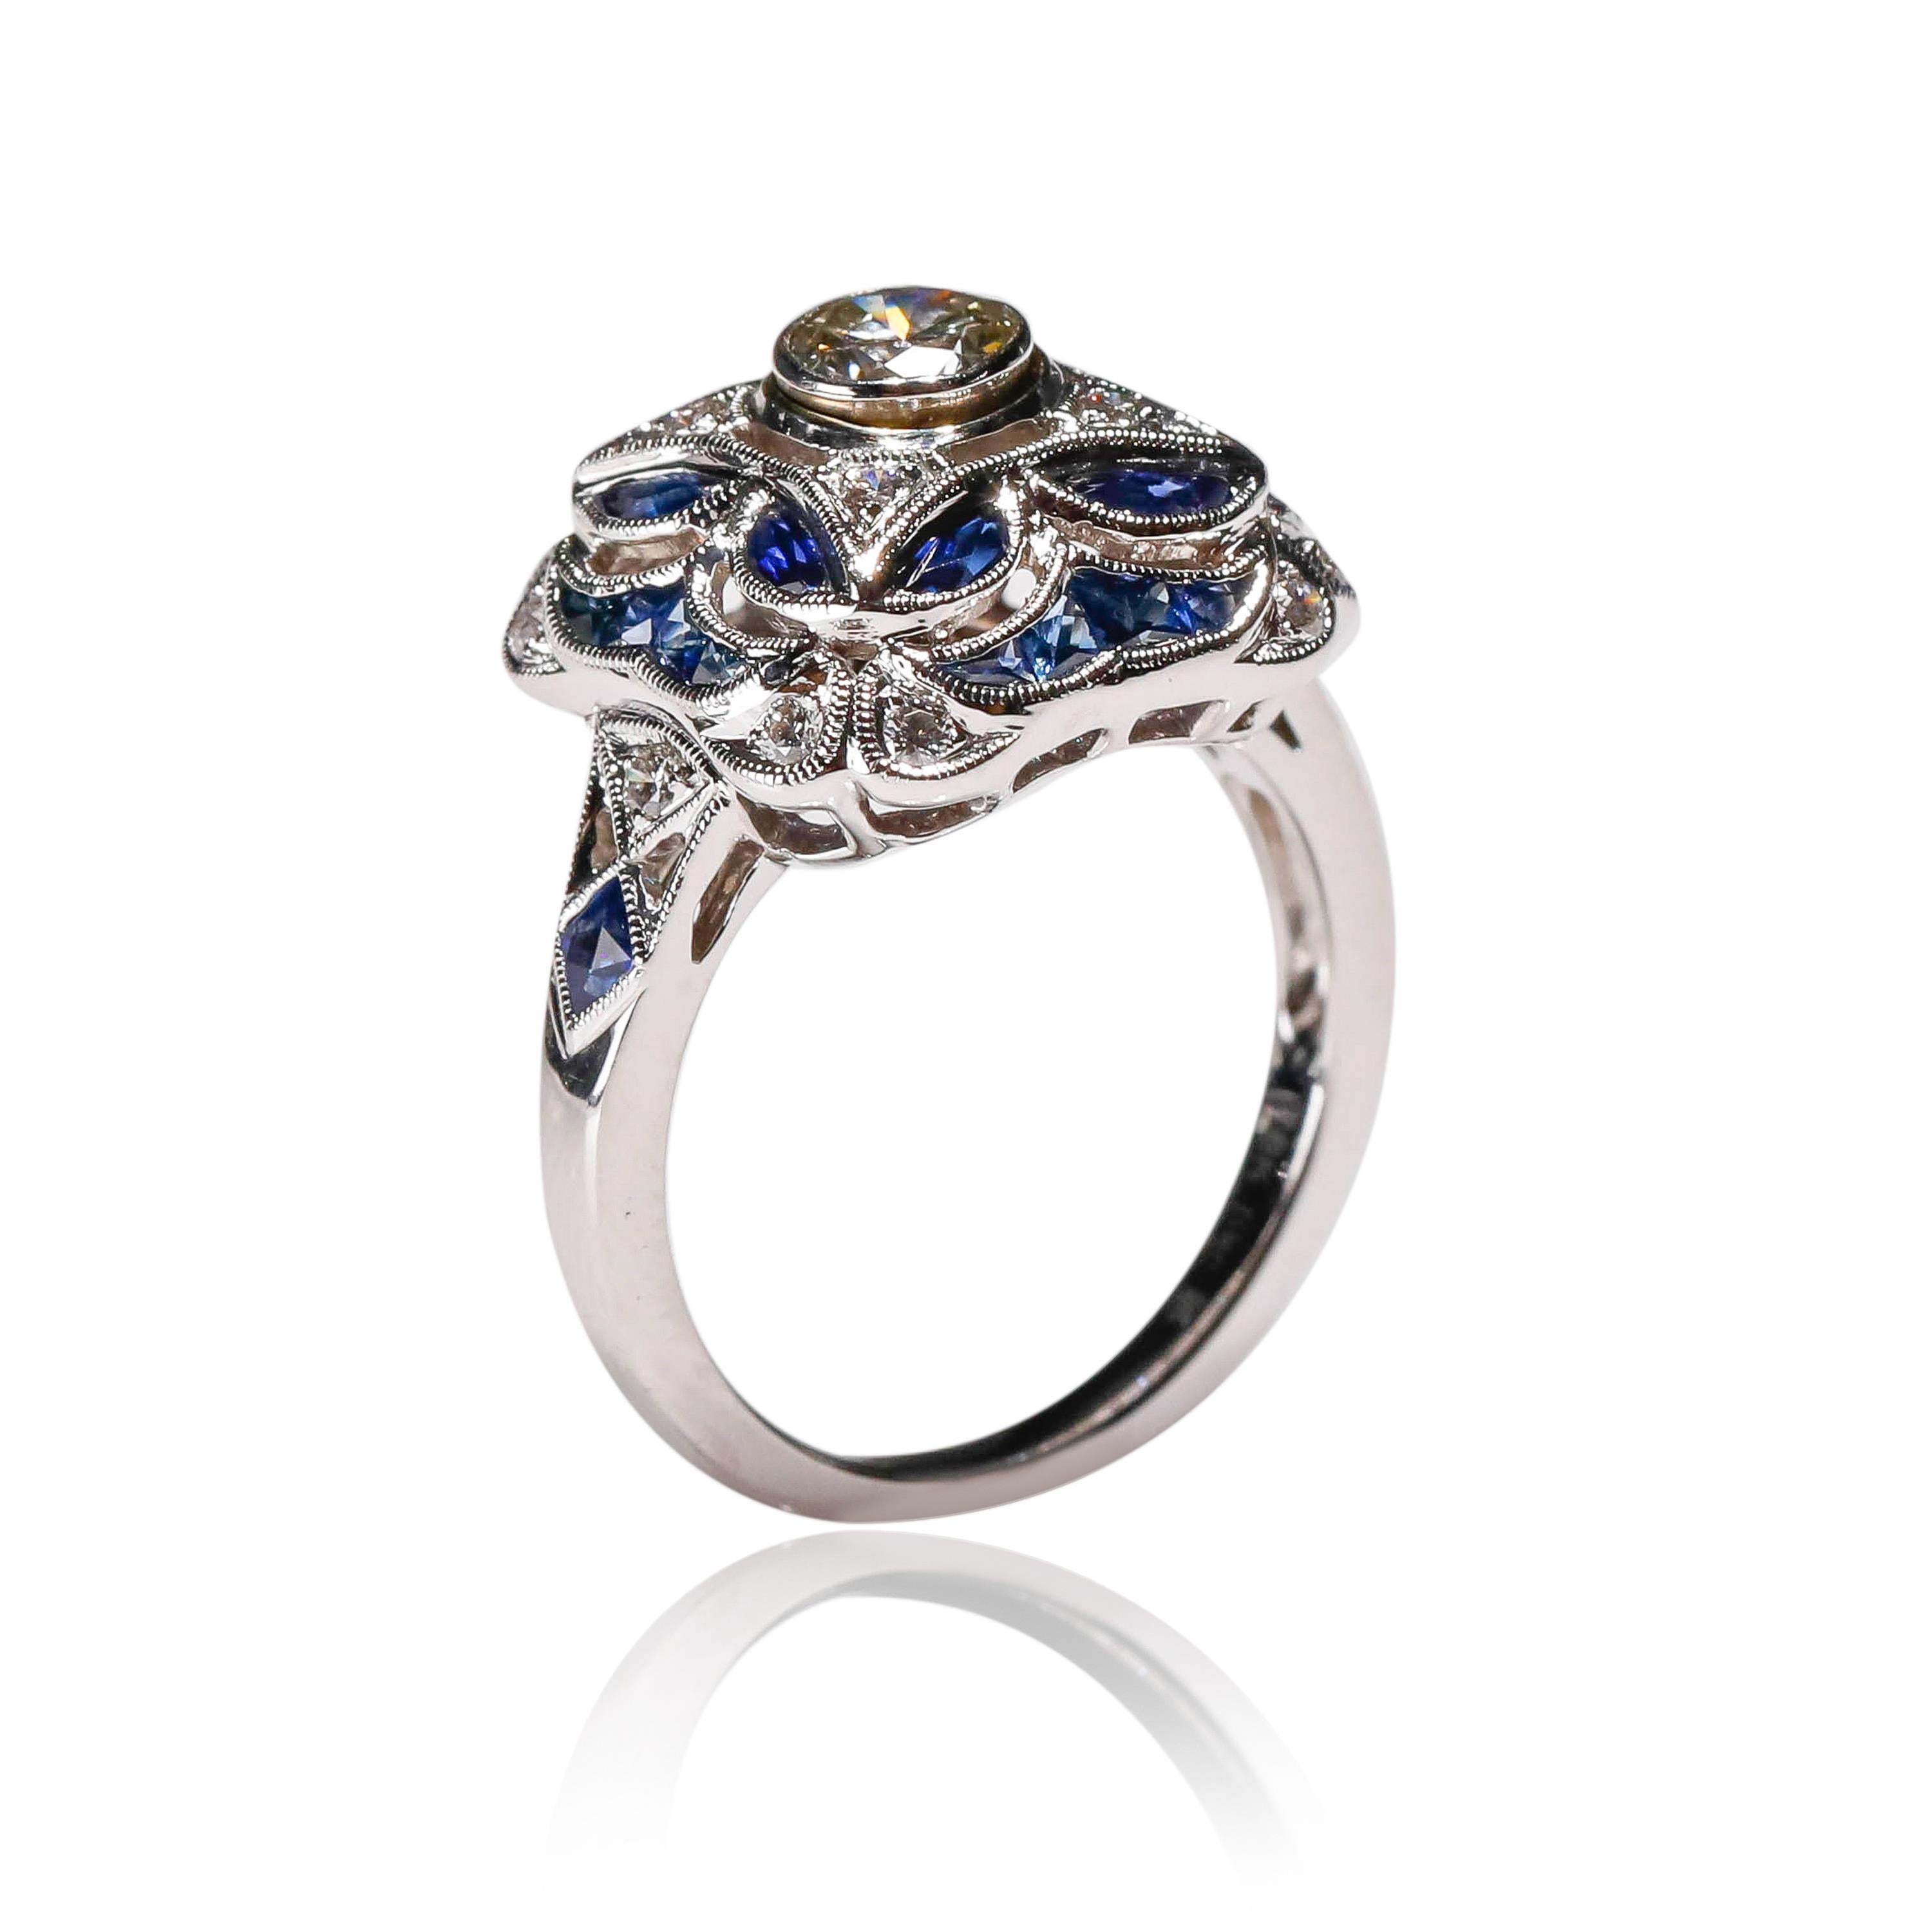 0.5 Carat Sapphire 0.7 Carat Diamond 18K White Gold Ring Art Deco Style In New Condition For Sale In New York, NY